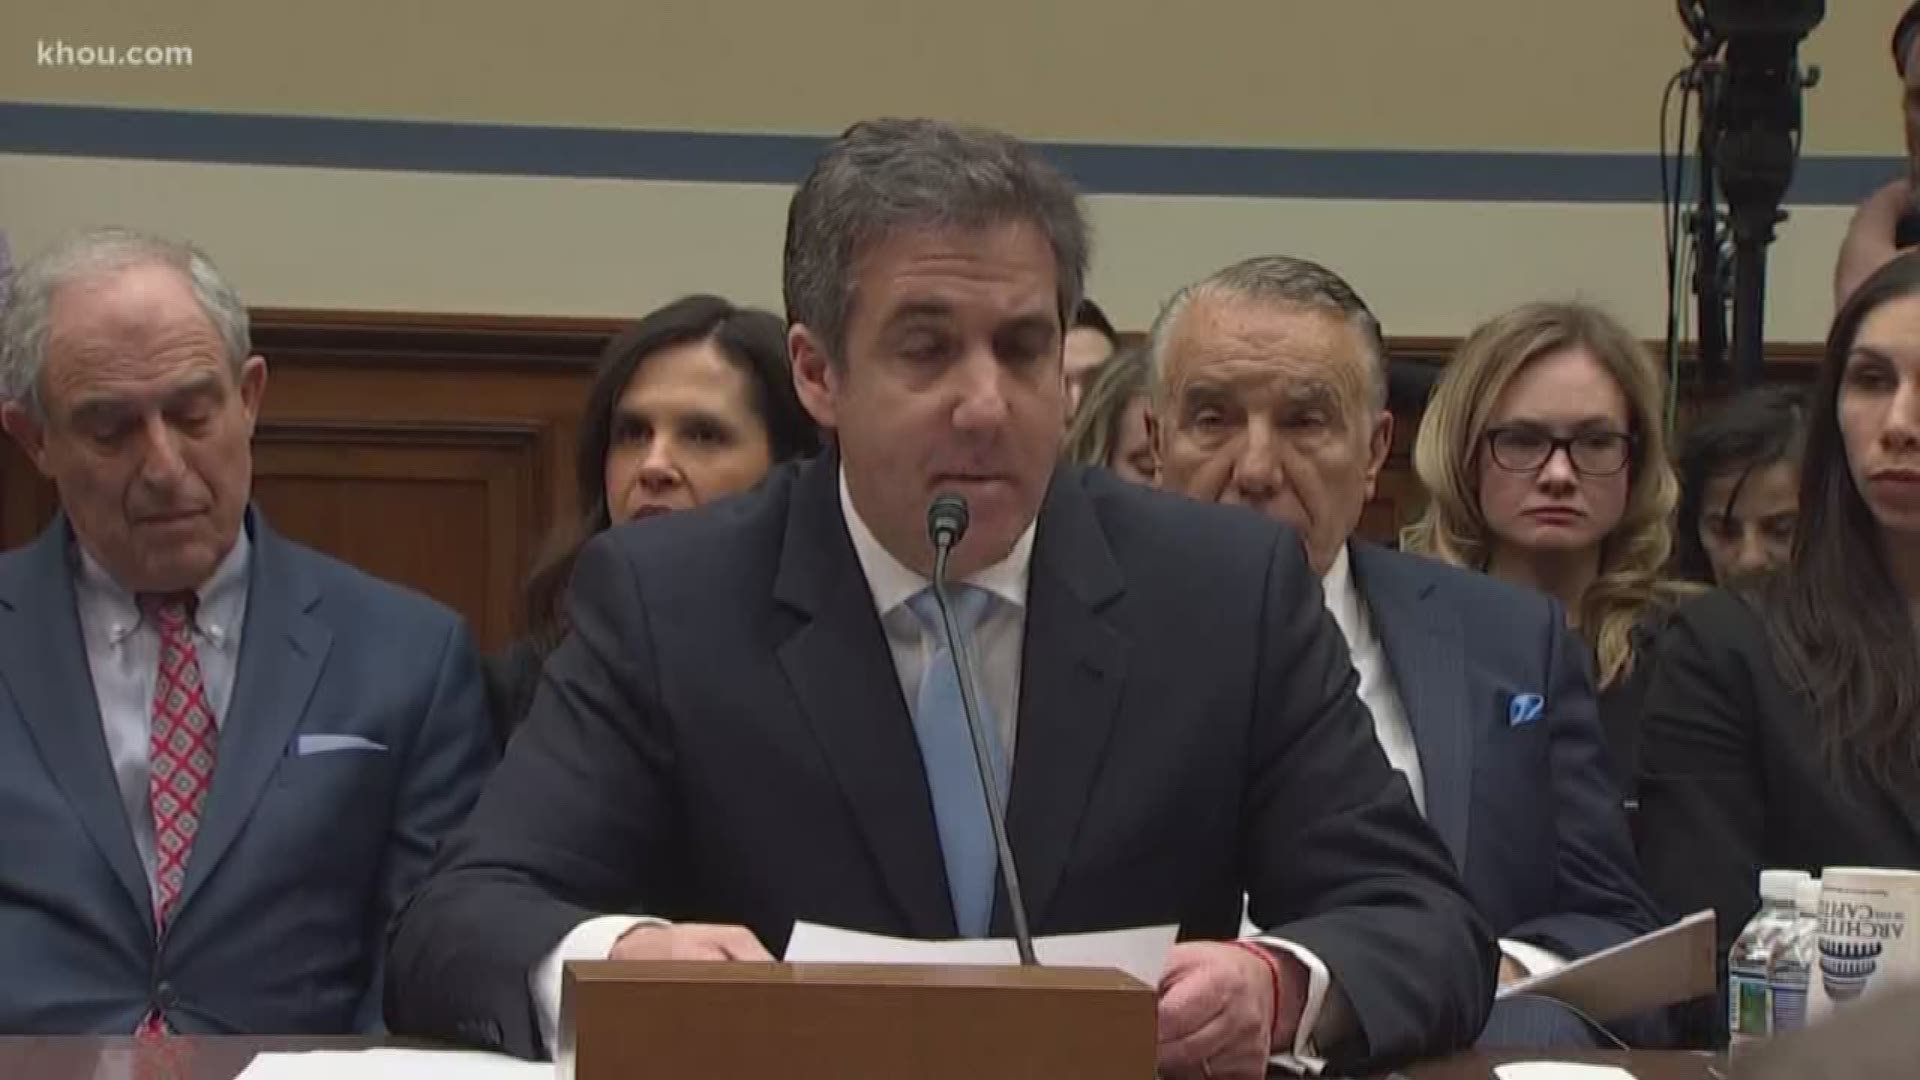 Following Michael Cohen's testimony to a House committee, what will the Democratic-majority House do, and will their actions go anywhere in a Republican-controlled Senate?